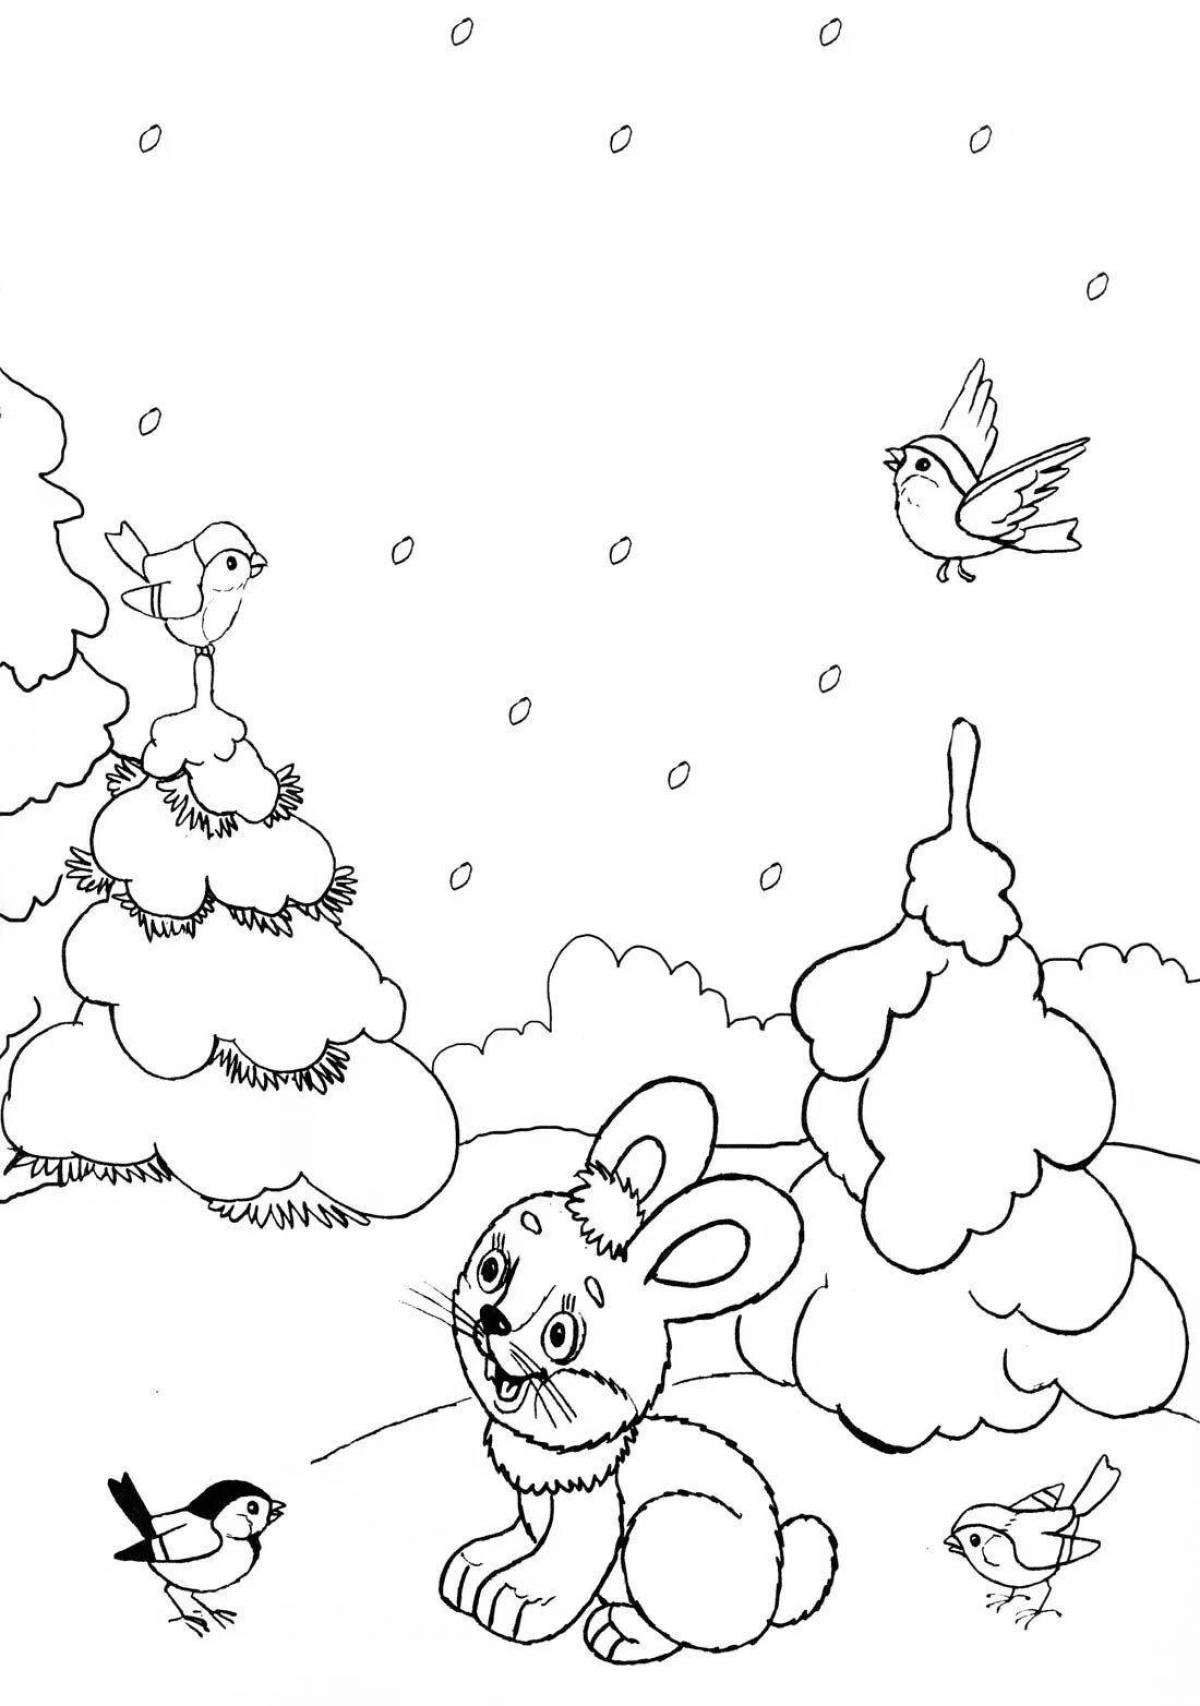 Blissful winter in the forest coloring page